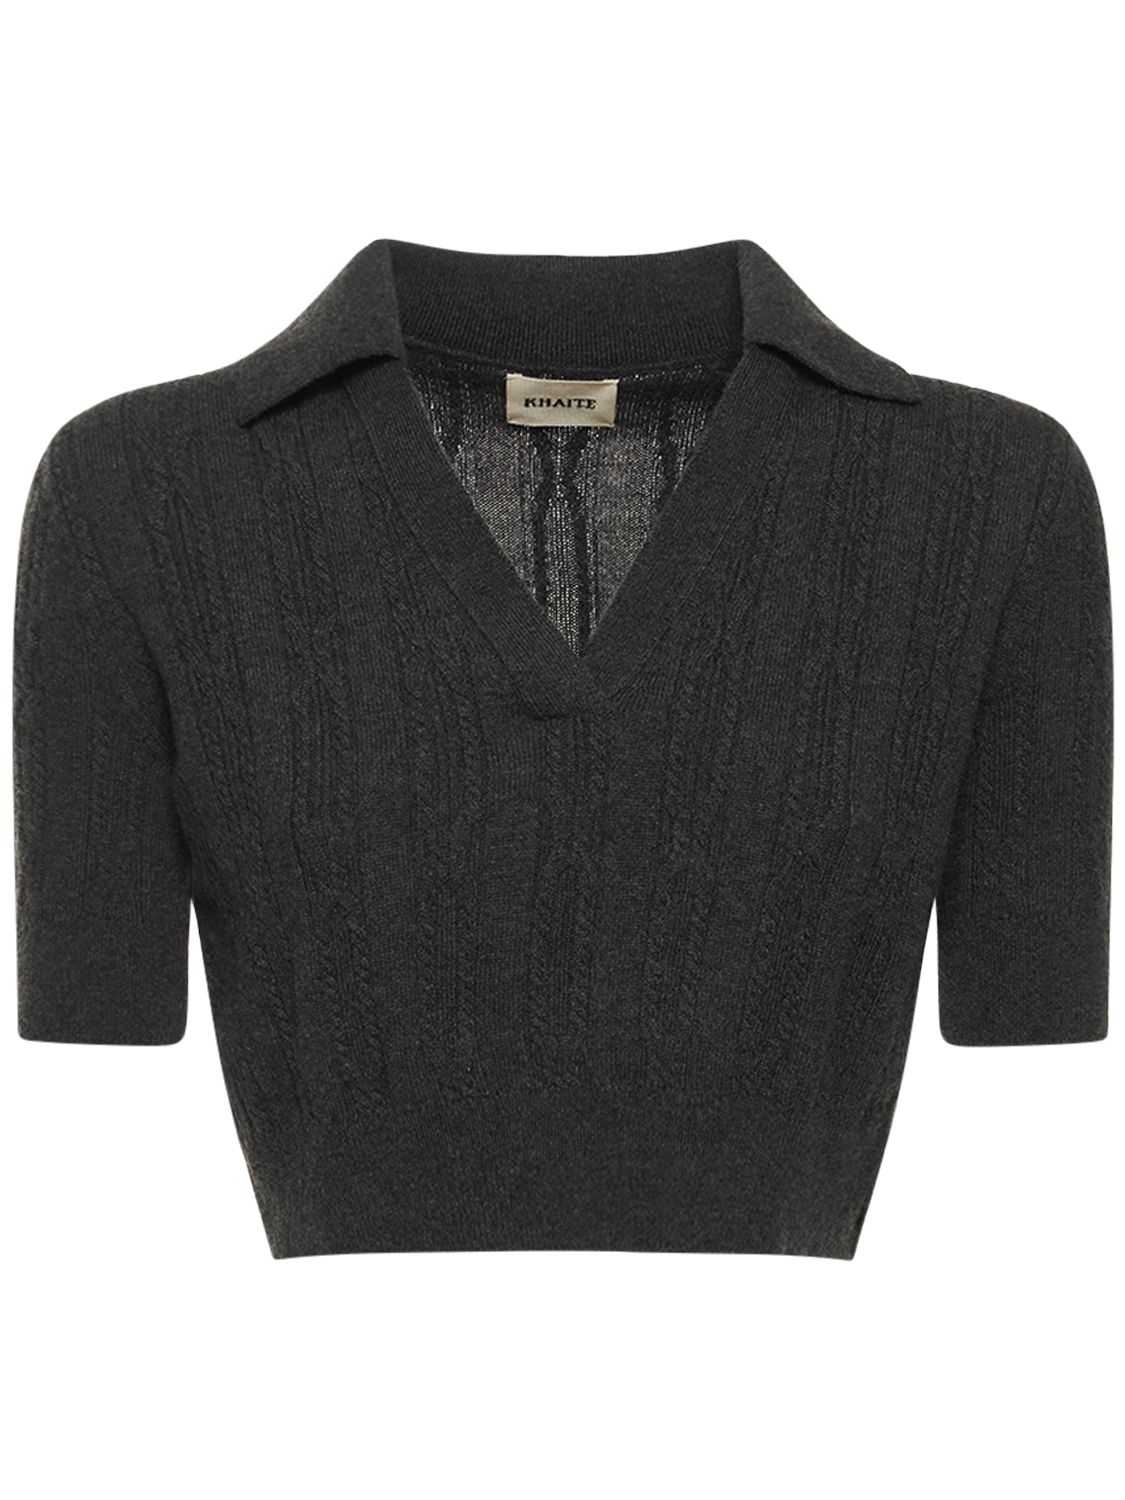 Lylith Cashmere Sweater